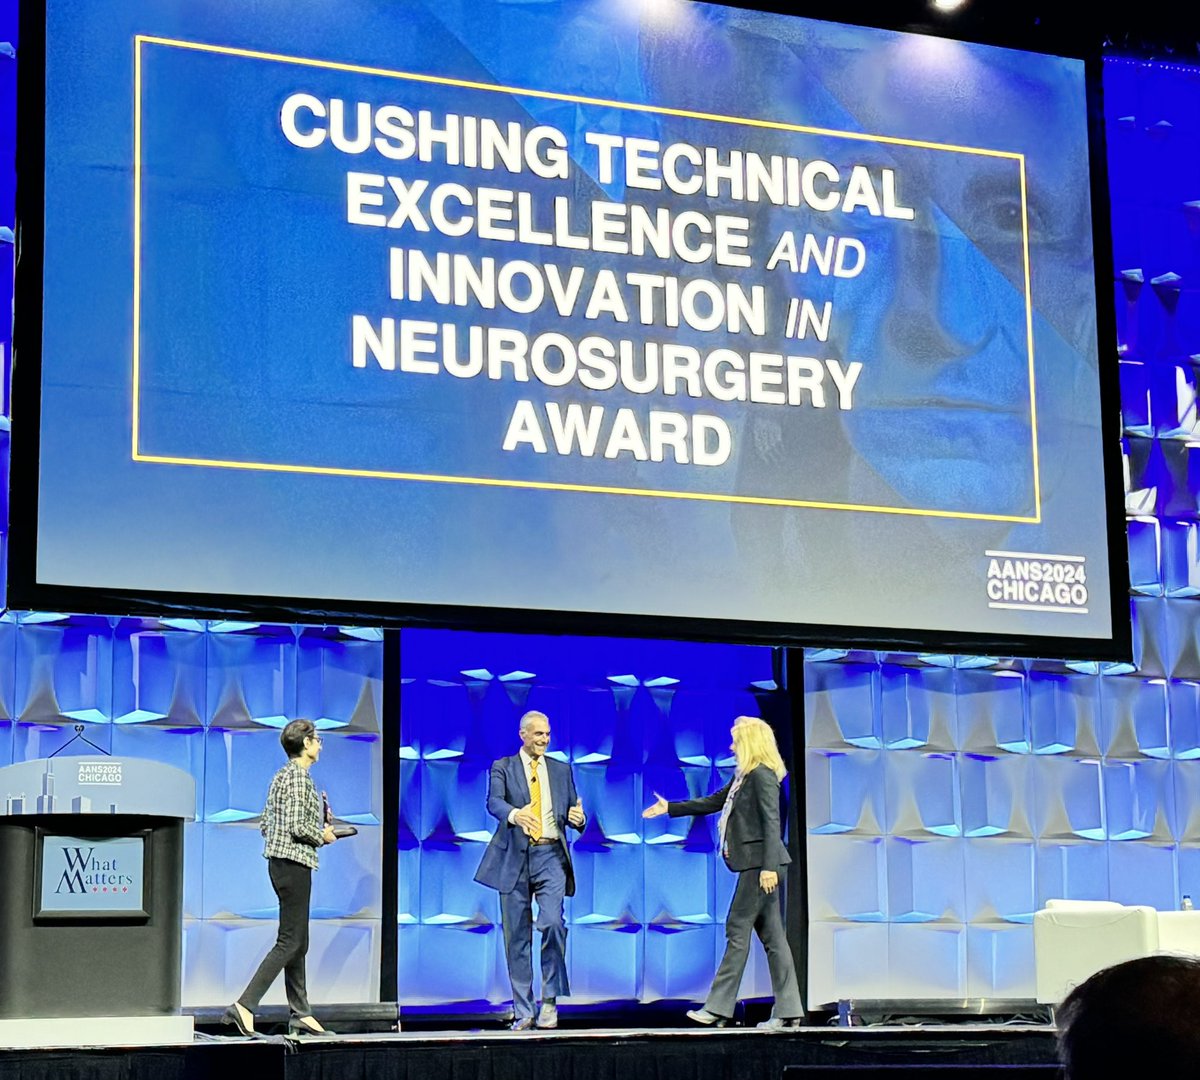 Congratulations to Dr. Berger for receiving the Cushing Technical Excellence and Innovation in Neurosurgery Award at the #AANS2024 🙌 @NeurosurgUCSF @AANSNeuro Well deserved!